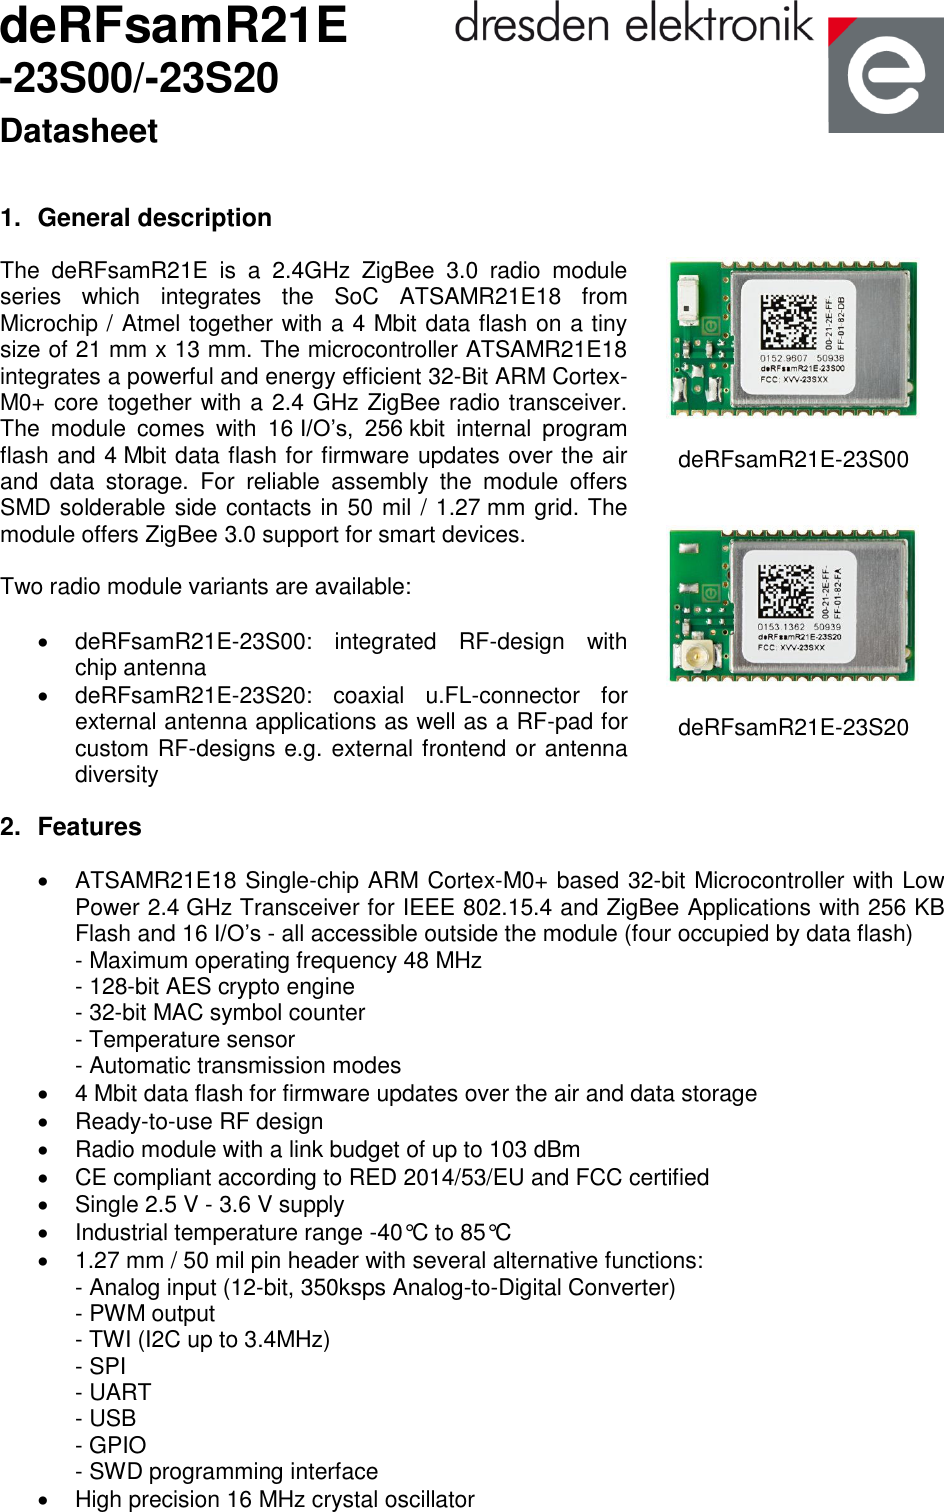              deRFsamR21E -23S00/-23S20 Datasheet 1.  General description The  deRFsamR21E  is  a  2.4GHz  ZigBee  3.0  radio  module series  which  integrates  the  SoC  ATSAMR21E18  from Microchip / Atmel together with a 4 Mbit data flash on a tiny size of 21 mm x 13 mm. The microcontroller ATSAMR21E18 integrates a powerful and energy efficient 32-Bit ARM Cortex-M0+ core together with a 2.4 GHz ZigBee radio transceiver. The  module  comes  with  16 I/O’s,  256 kbit  internal  program flash and 4 Mbit data flash for firmware updates over the air and  data  storage.  For  reliable  assembly  the  module  offers SMD solderable side contacts in 50 mil / 1.27 mm grid. The module offers ZigBee 3.0 support for smart devices.   Two radio module variants are available:    deRFsamR21E-23S00:  integrated  RF-design  with chip antenna   deRFsamR21E-23S20:  coaxial  u.FL-connector  for external antenna applications as well as a RF-pad for custom RF-designs e.g. external frontend or antenna diversity                 deRFsamR21E-23S00     deRFsamR21E-23S20  2.  Features   ATSAMR21E18 Single-chip ARM Cortex-M0+ based 32-bit Microcontroller with Low Power 2.4 GHz Transceiver for IEEE 802.15.4 and ZigBee Applications with 256 KB Flash and 16 I/O’s - all accessible outside the module (four occupied by data flash) - Maximum operating frequency 48 MHz  - 128-bit AES crypto engine  - 32-bit MAC symbol counter  - Temperature sensor - Automatic transmission modes    4 Mbit data flash for firmware updates over the air and data storage   Ready-to-use RF design    Radio module with a link budget of up to 103 dBm   CE compliant according to RED 2014/53/EU and FCC certified   Single 2.5 V - 3.6 V supply    Industrial temperature range -40°C to 85°C    1.27 mm / 50 mil pin header with several alternative functions: - Analog input (12-bit, 350ksps Analog-to-Digital Converter)  - PWM output - TWI (I2C up to 3.4MHz)  - SPI  - UART  - USB - GPIO - SWD programming interface   High precision 16 MHz crystal oscillator   